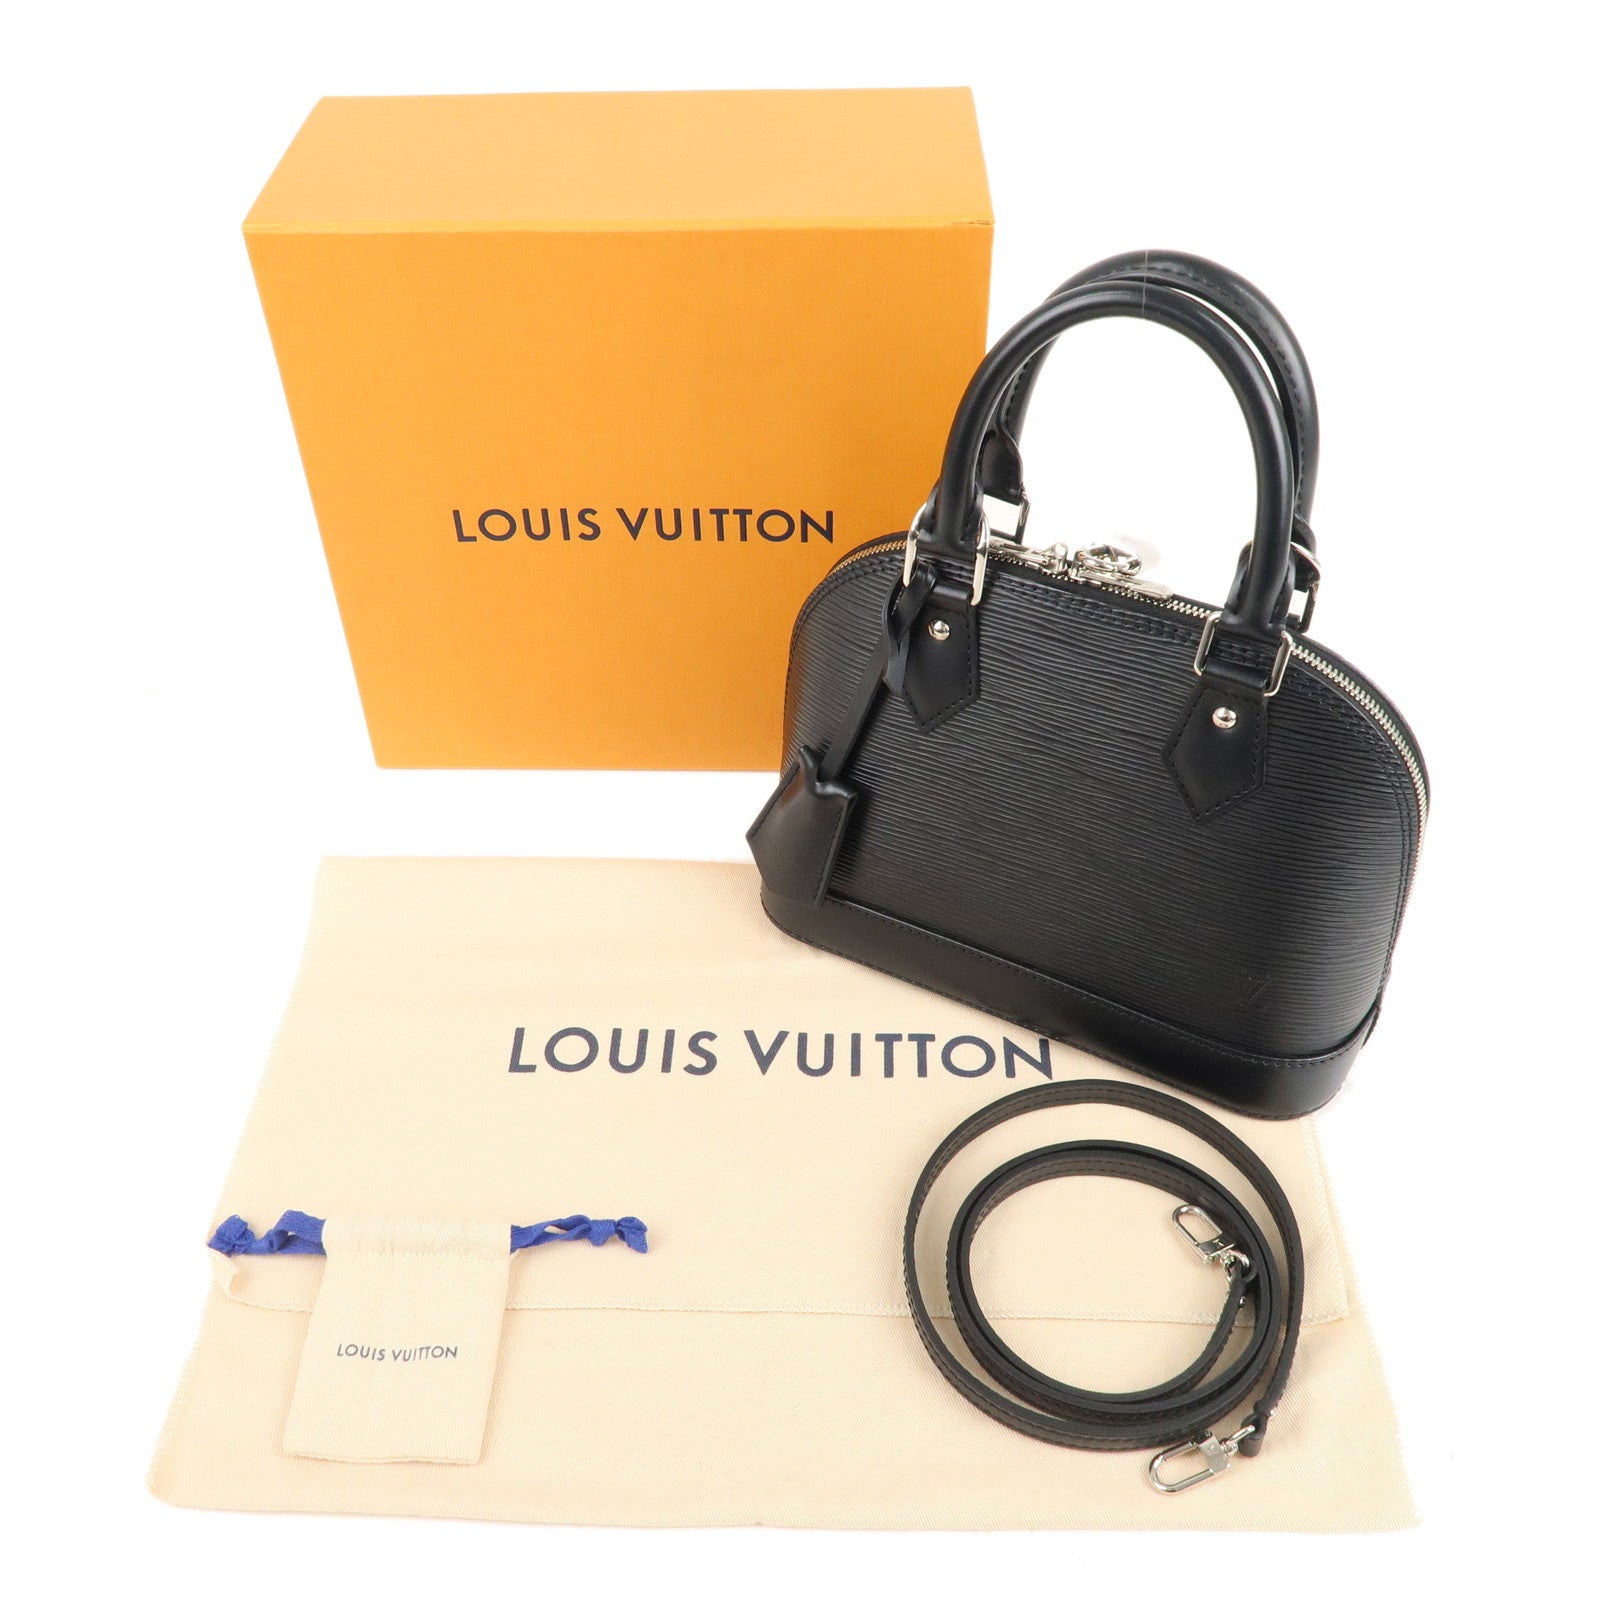 Products by Louis Vuitton: Alma BB  Louis vuitton alma bb, Louis vuitton  alma, Black louis vuitton